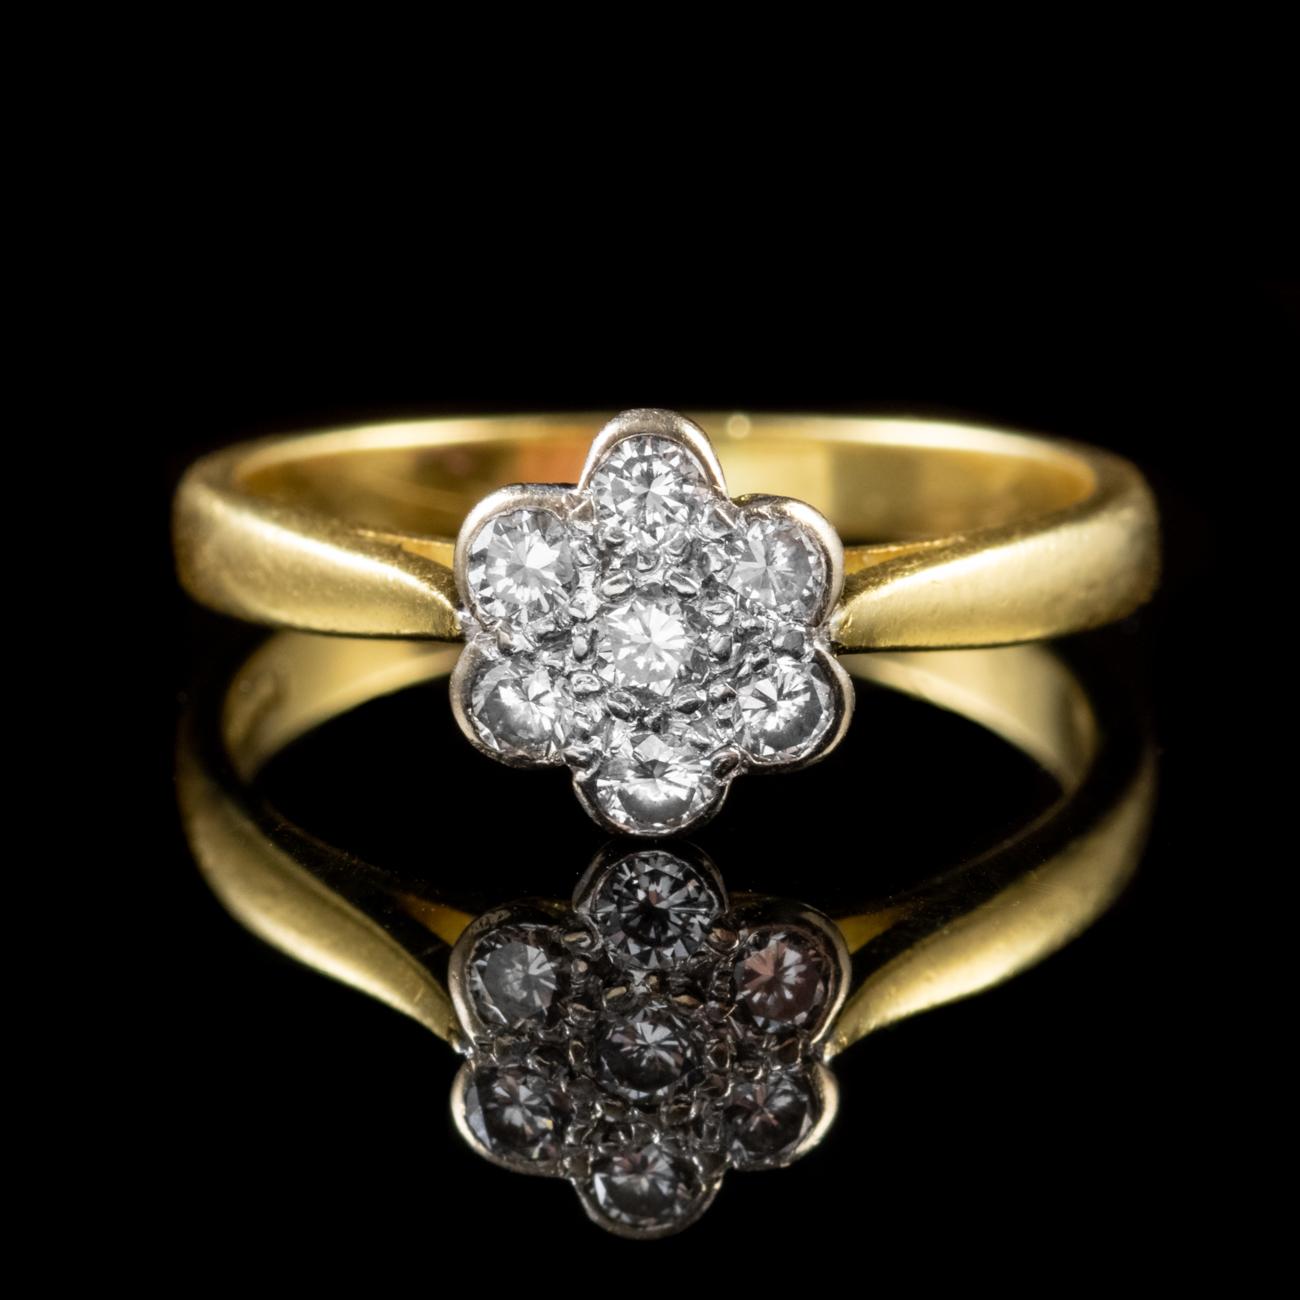 This beautiful ring has been commissioned in 18ct Yellow Gold and features an ornate 18ct White Gold gallery. The gallery is set with seven sparkling old cut Diamonds, each of which weighs approx. 0.08ct and boasts a clarity of VS1 and H